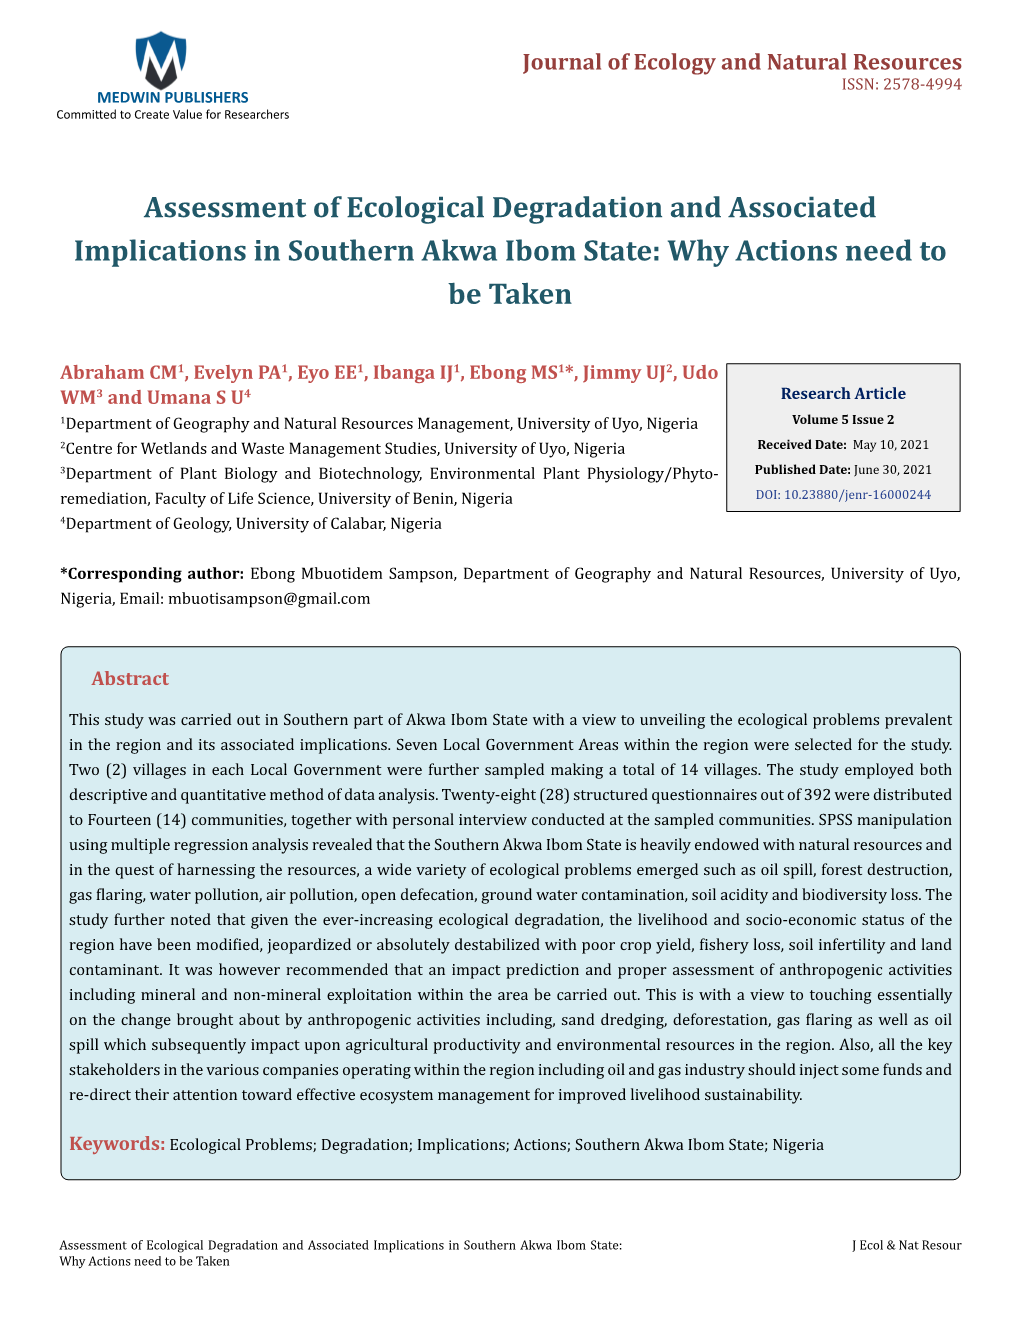 Assessment of Ecological Degradation and Associated Implications in Southern Akwa Ibom State: Why Actions Need to Be Taken